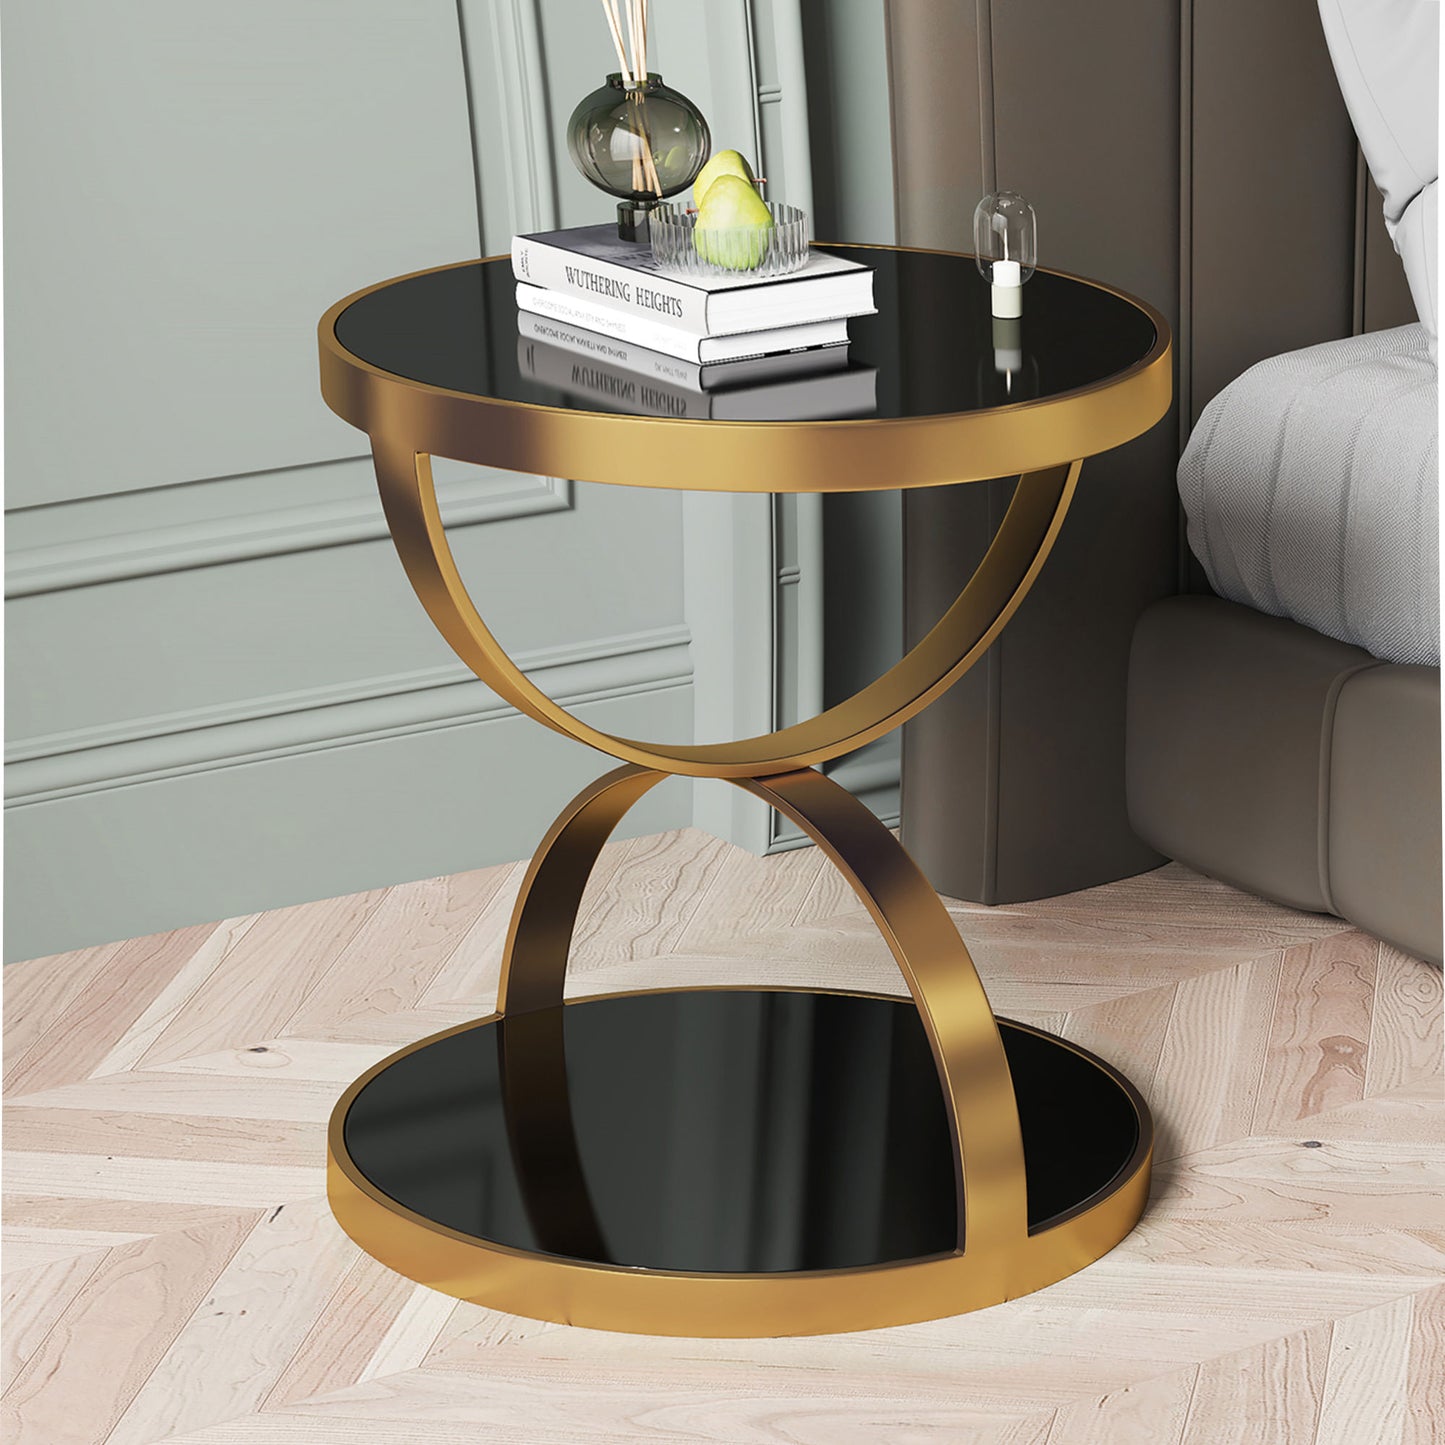 Luxury Stainless Steel End Table Decor with Storage Shelf for Home & Living Room |Gold Coffee Table|Outdoor & Indoor Furniture